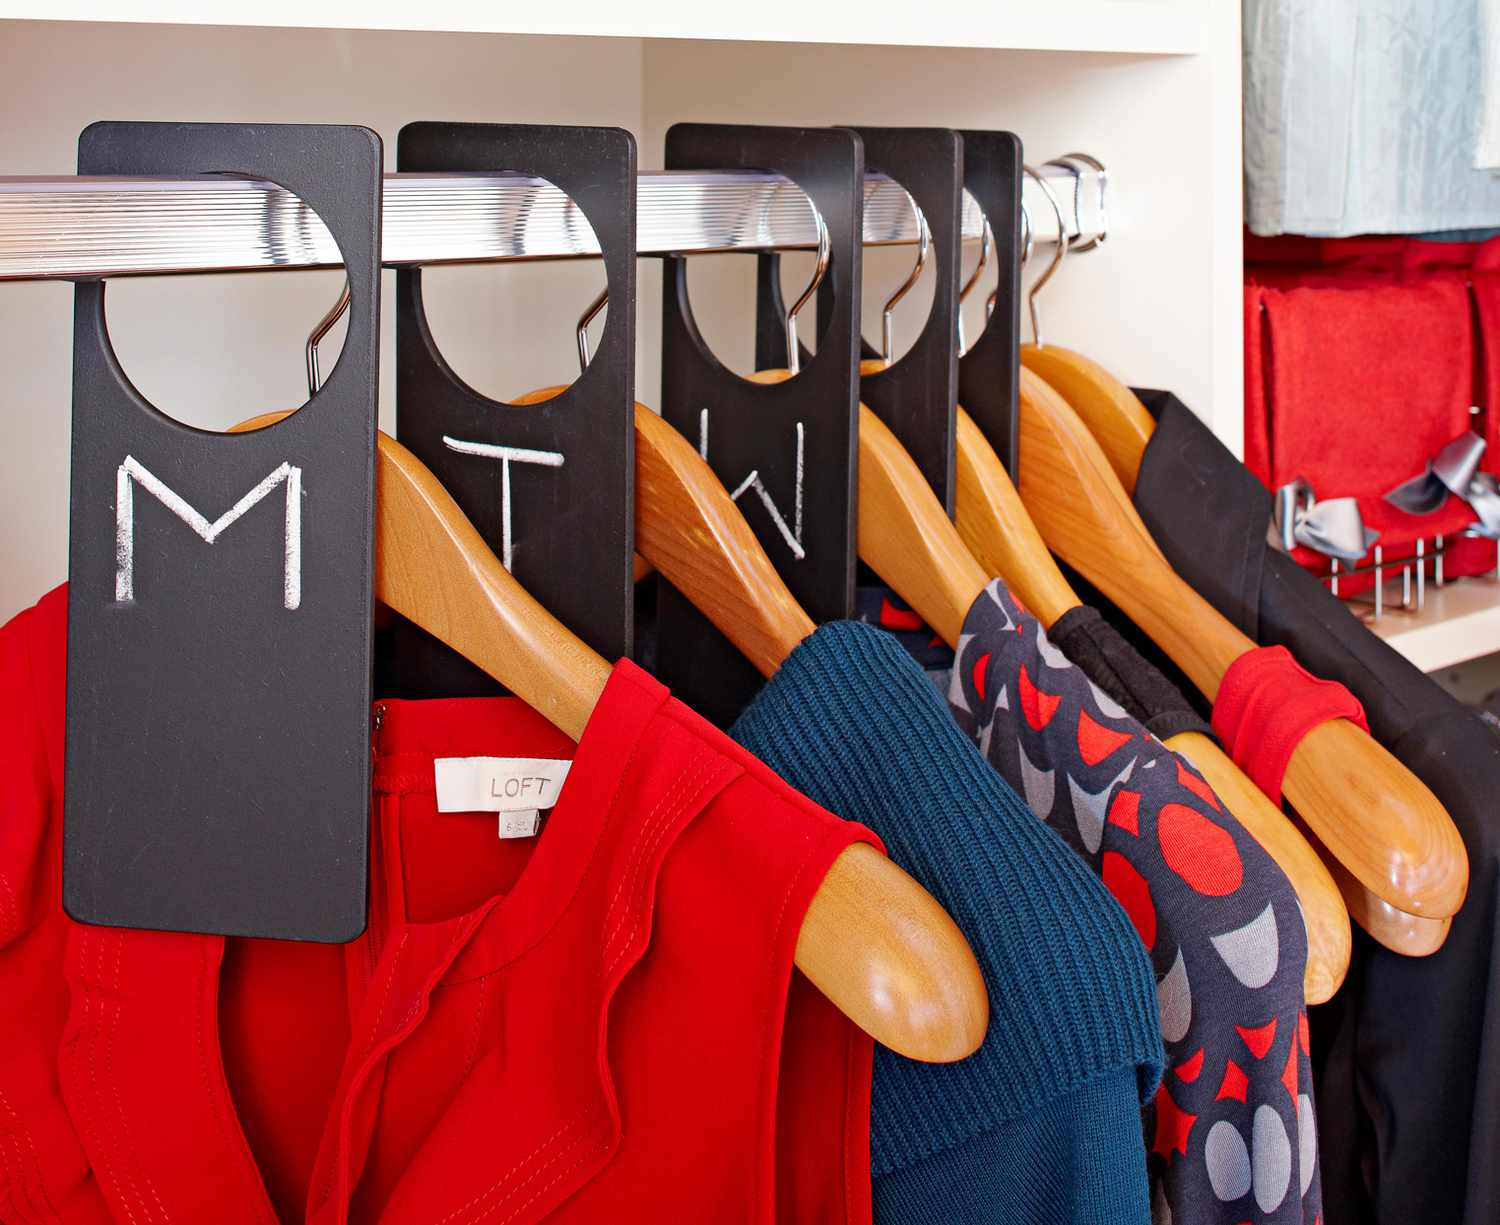 clothing hung on wooden hangers between dividers